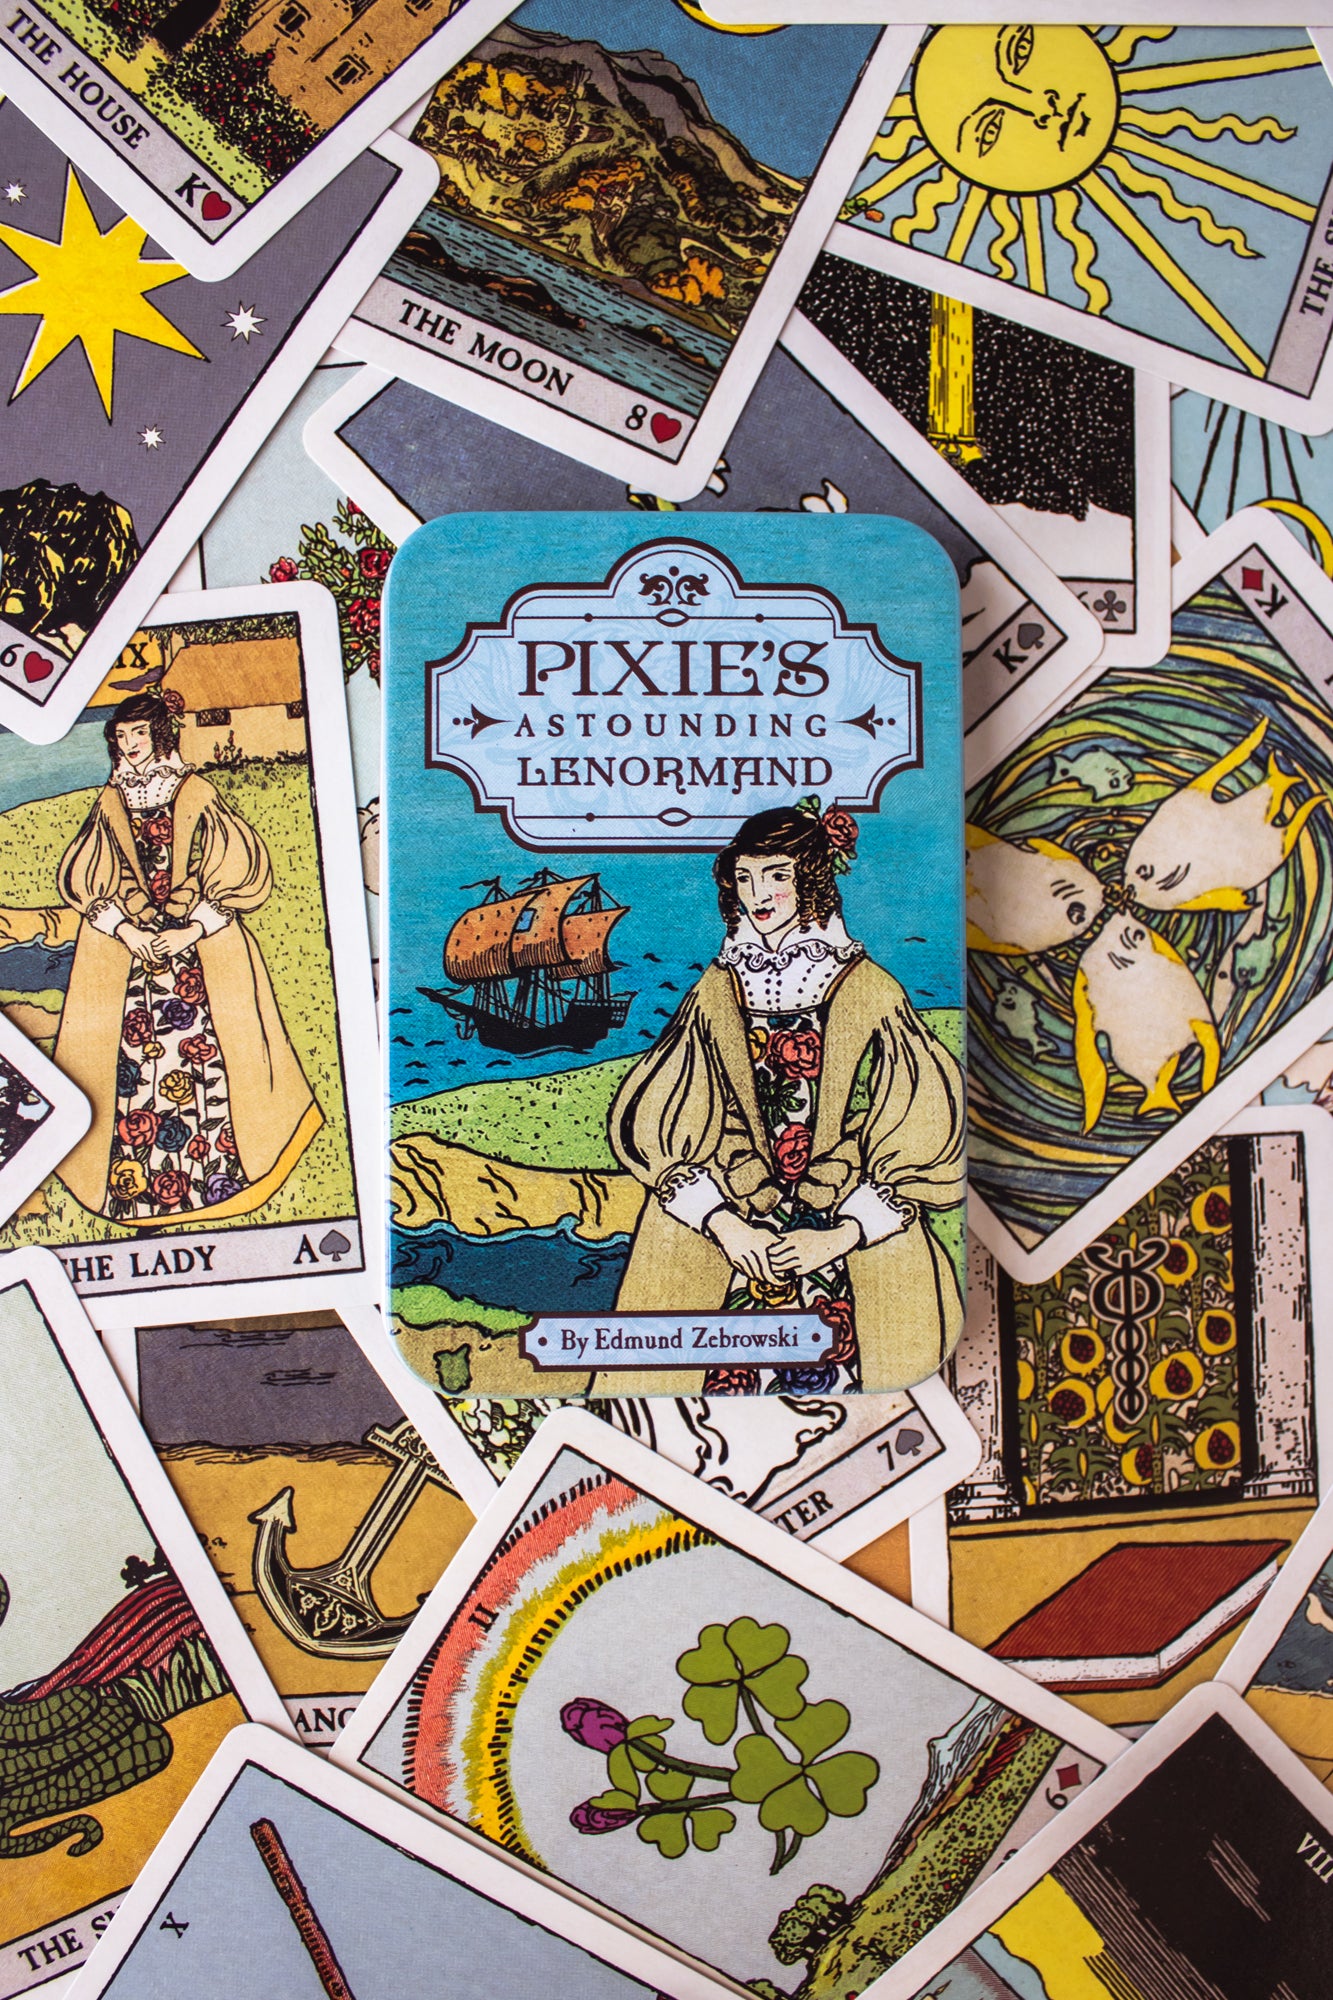 Pixie's Astounding Lenormand cards. This deck features artwork reminiscent of traditional Tarot archetypes, but in a simpler fashion. Cards are laid out in a colorful spread with the tin box sitting on top.